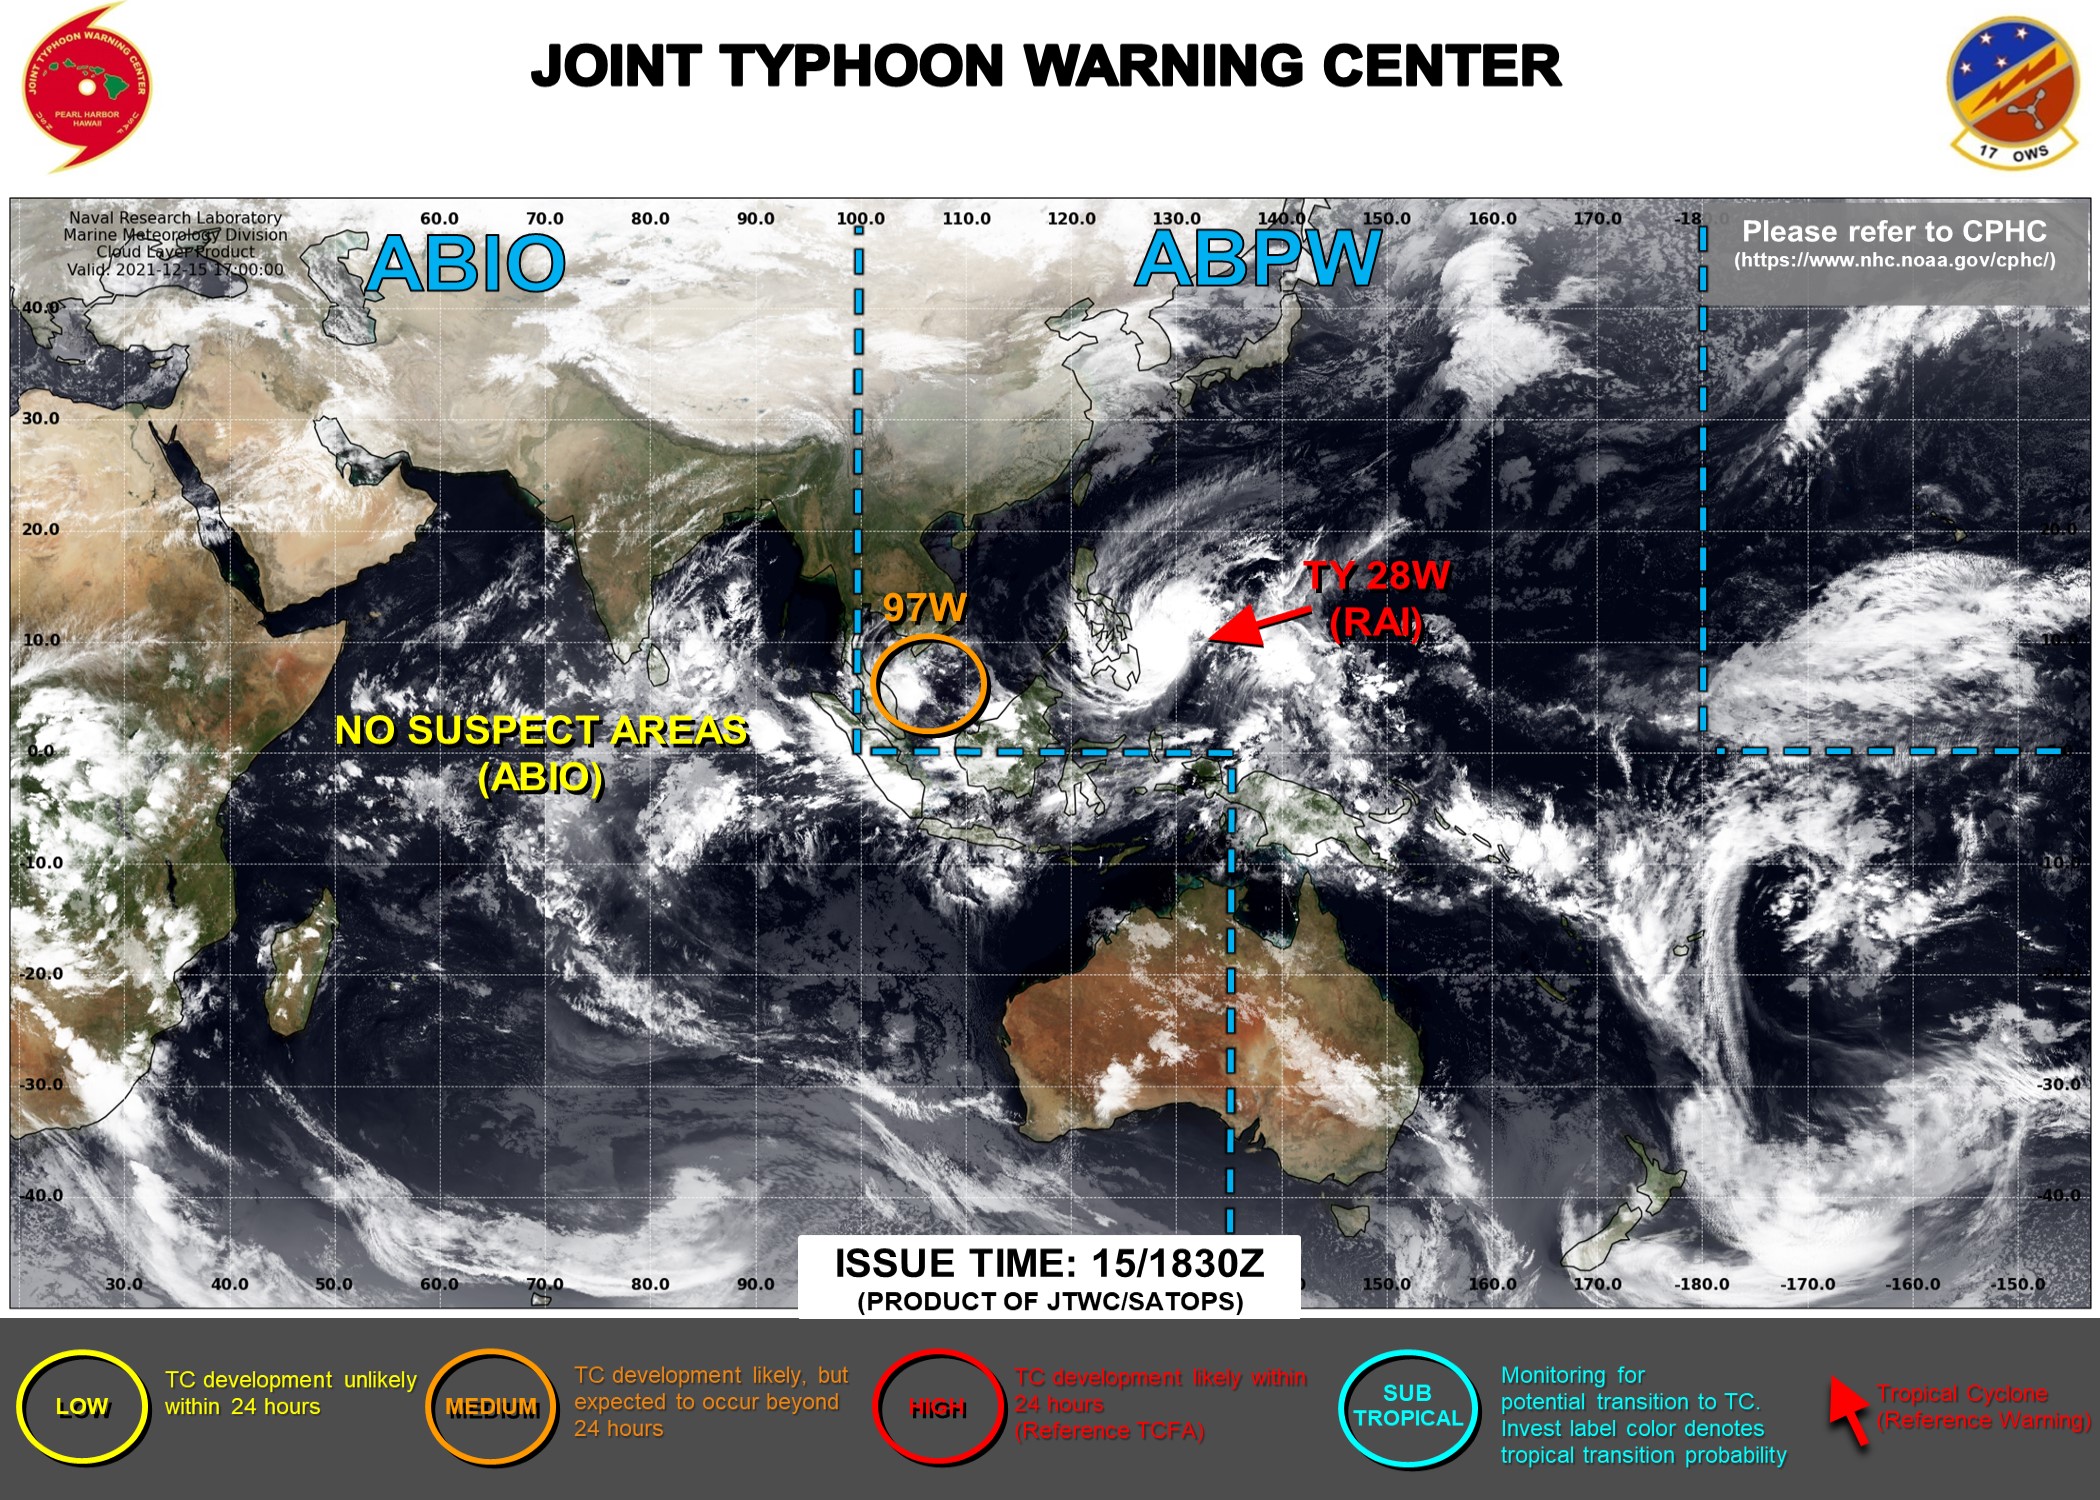 JTWC IS ISSUING 6HOURLY WARNINGS AND 3HOURLY SATELLITE BULLETINS ON 28W(RAI).